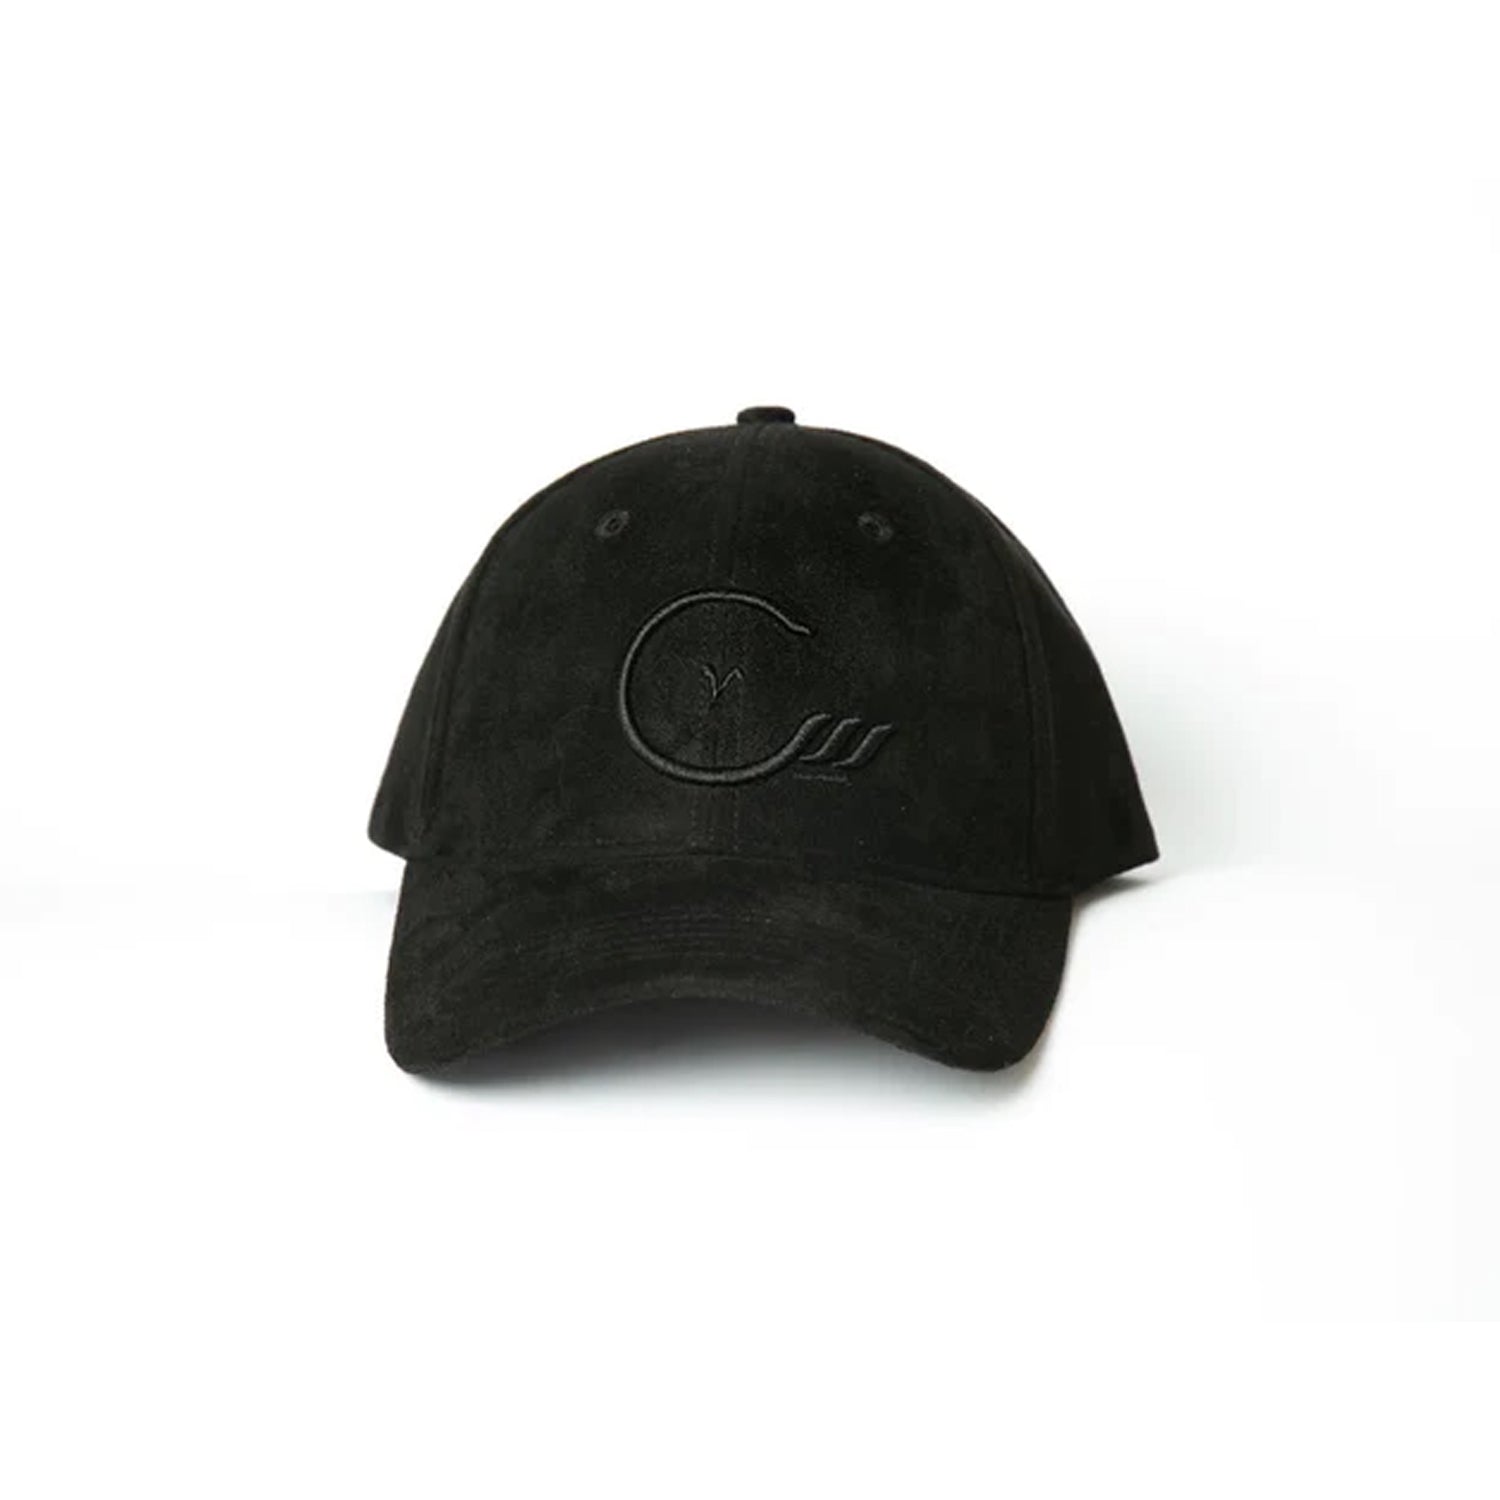 BLACK CAP WITH BACK TIE FROM HOUSE OF CENMAR